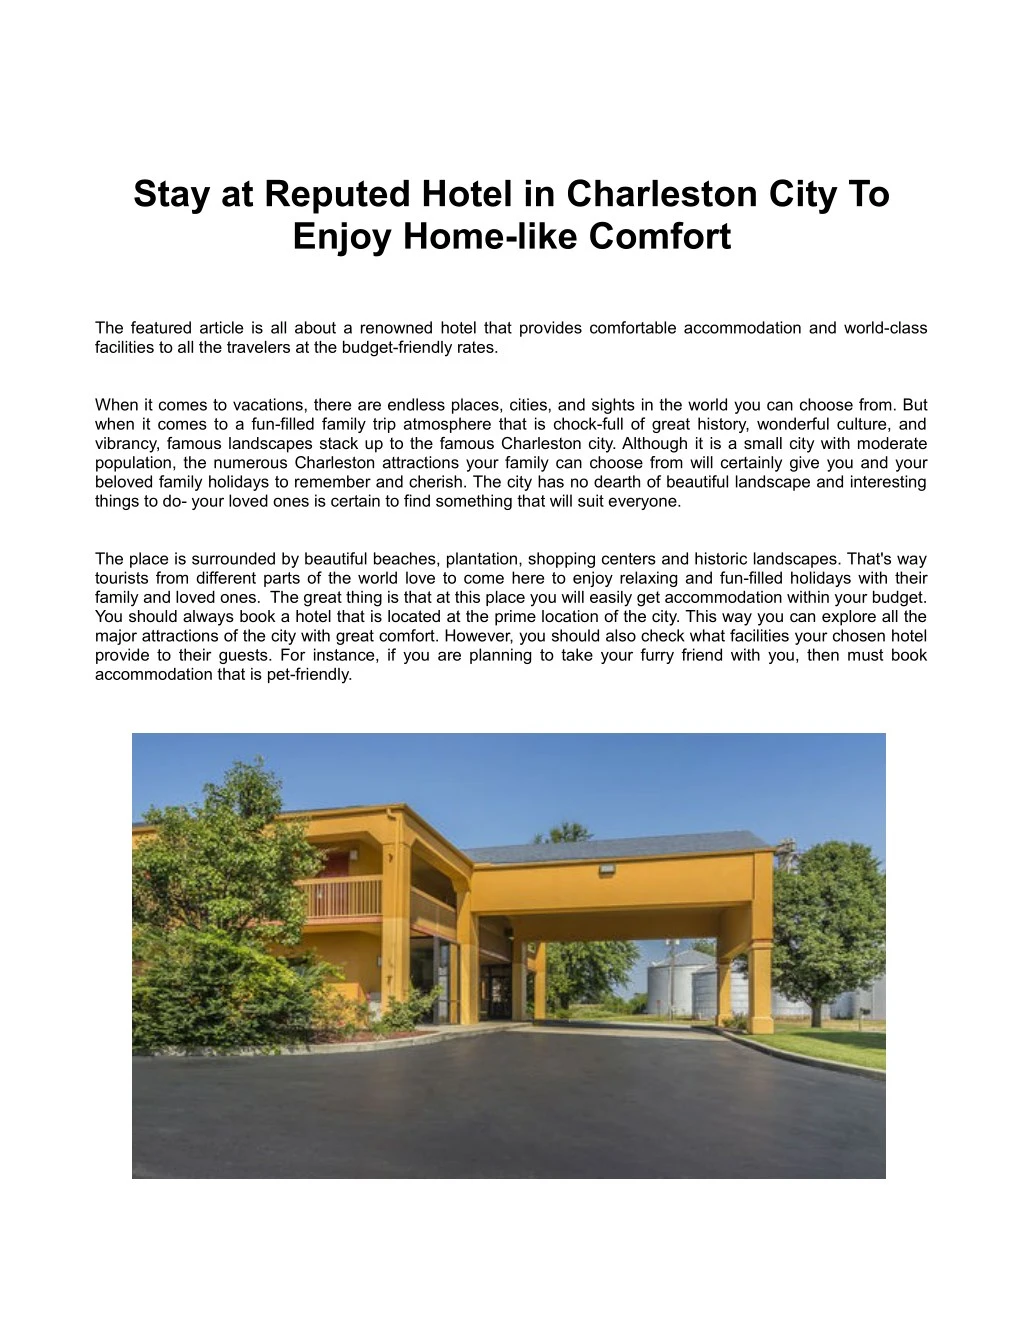 stay at reputed hotel in charleston city to enjoy